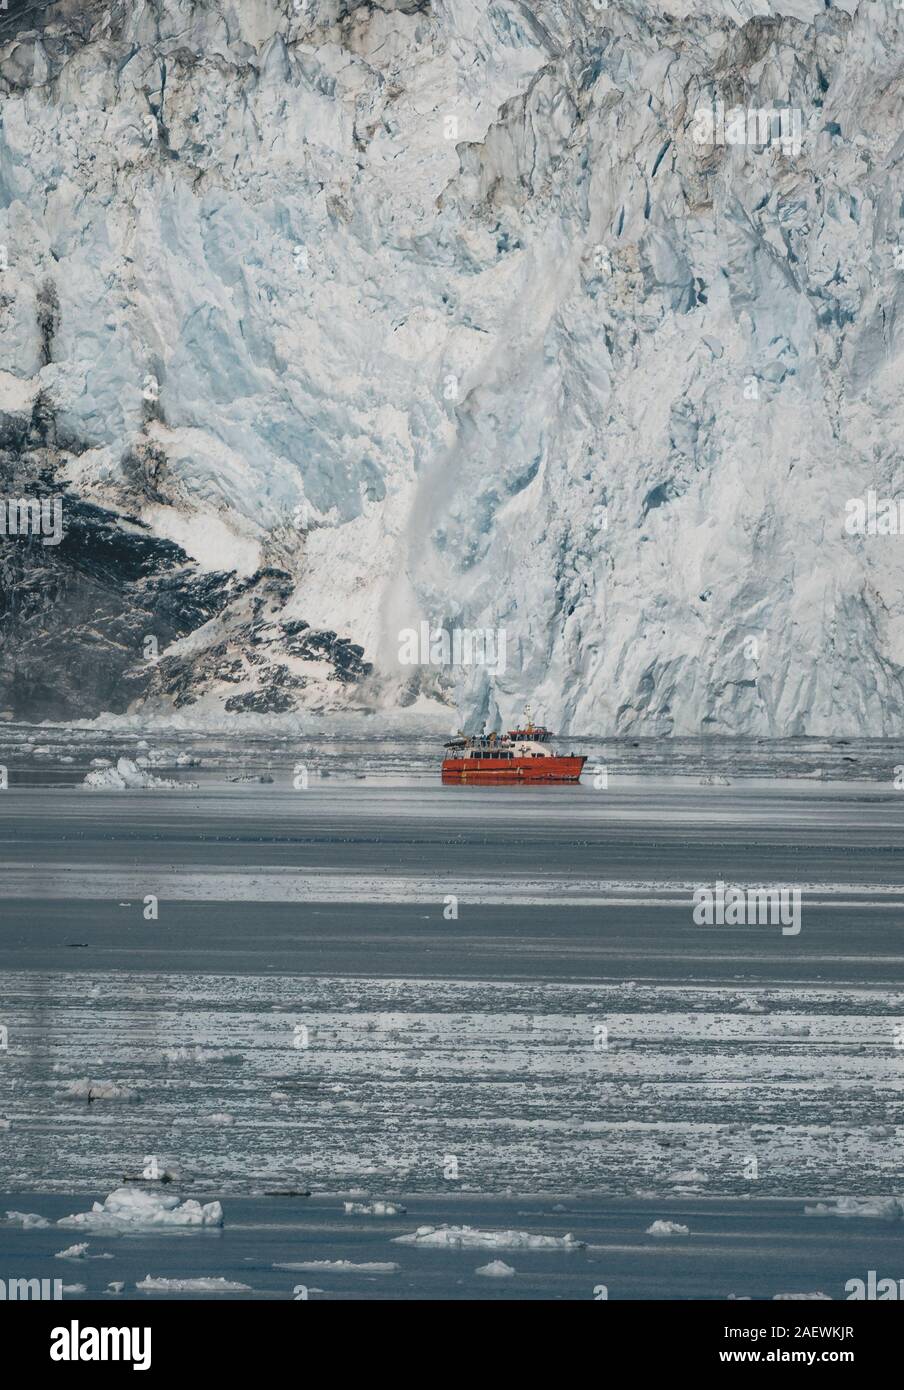 Red Passenger cruise ship sailing through the icy waters of Qasigiannguit, Greenland with Eqip Sermia Eqi Glacier in Background. Ice breaking off from Stock Photo